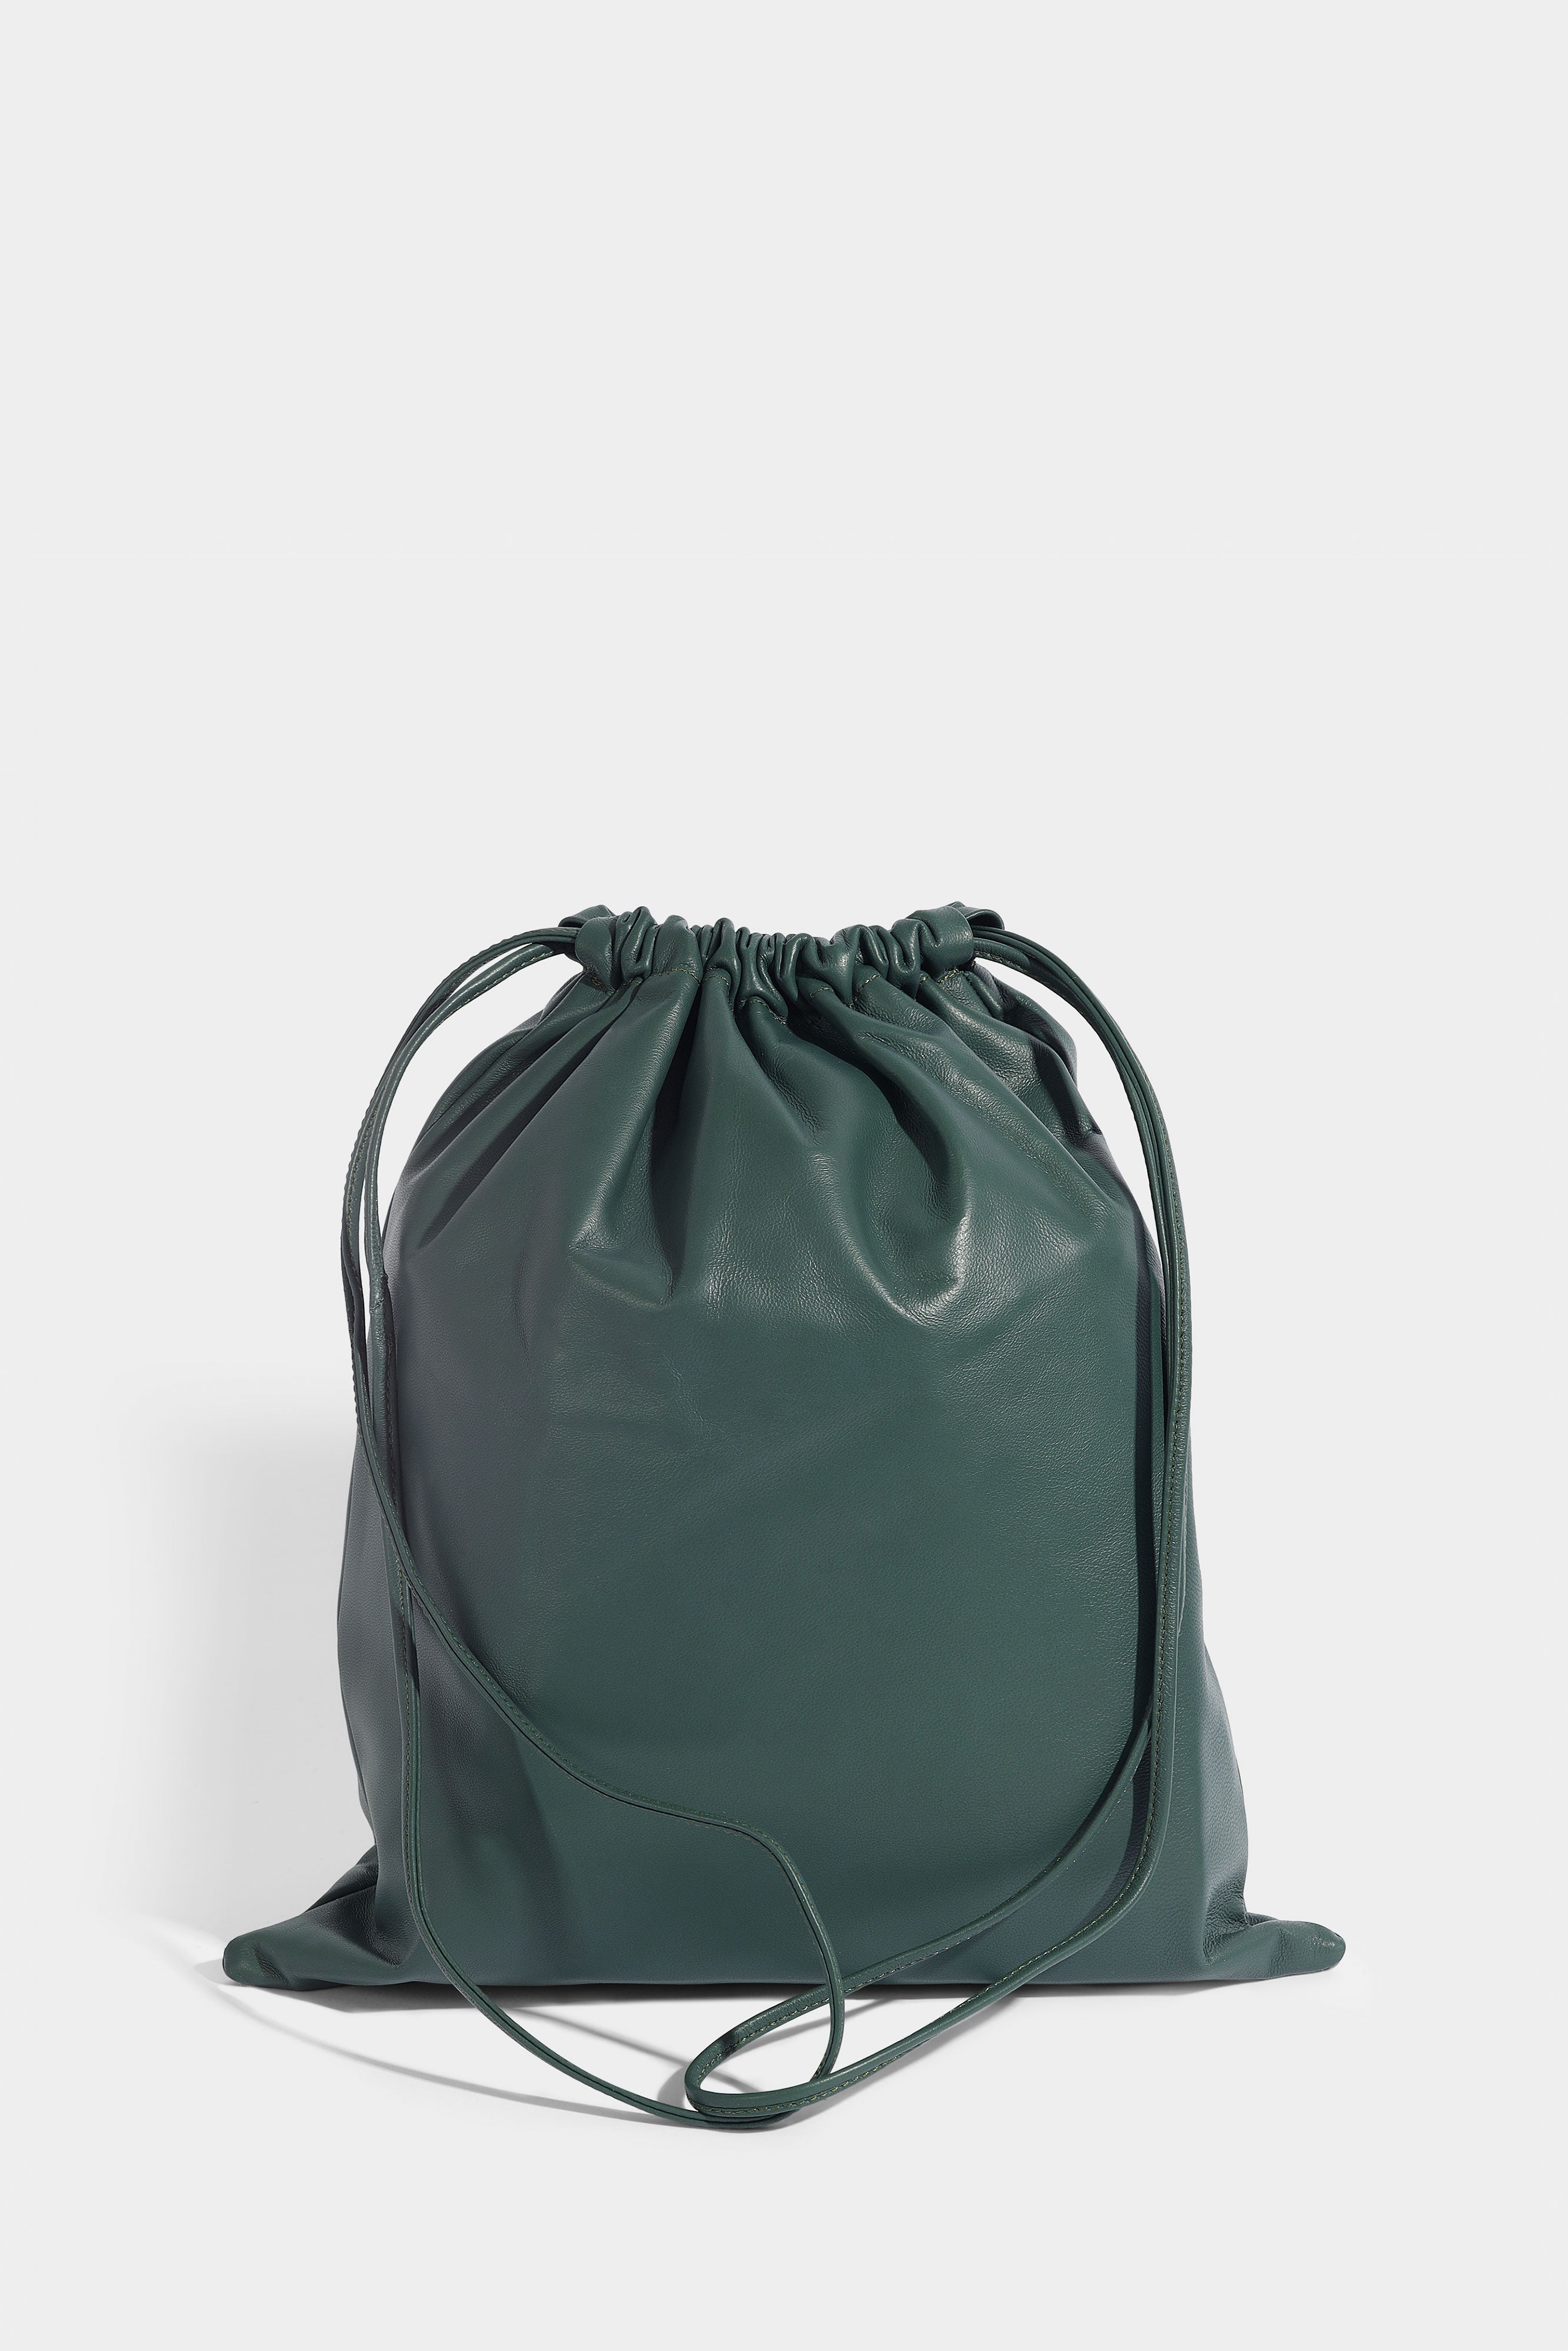 Convertible Drawstring Tote | Forest